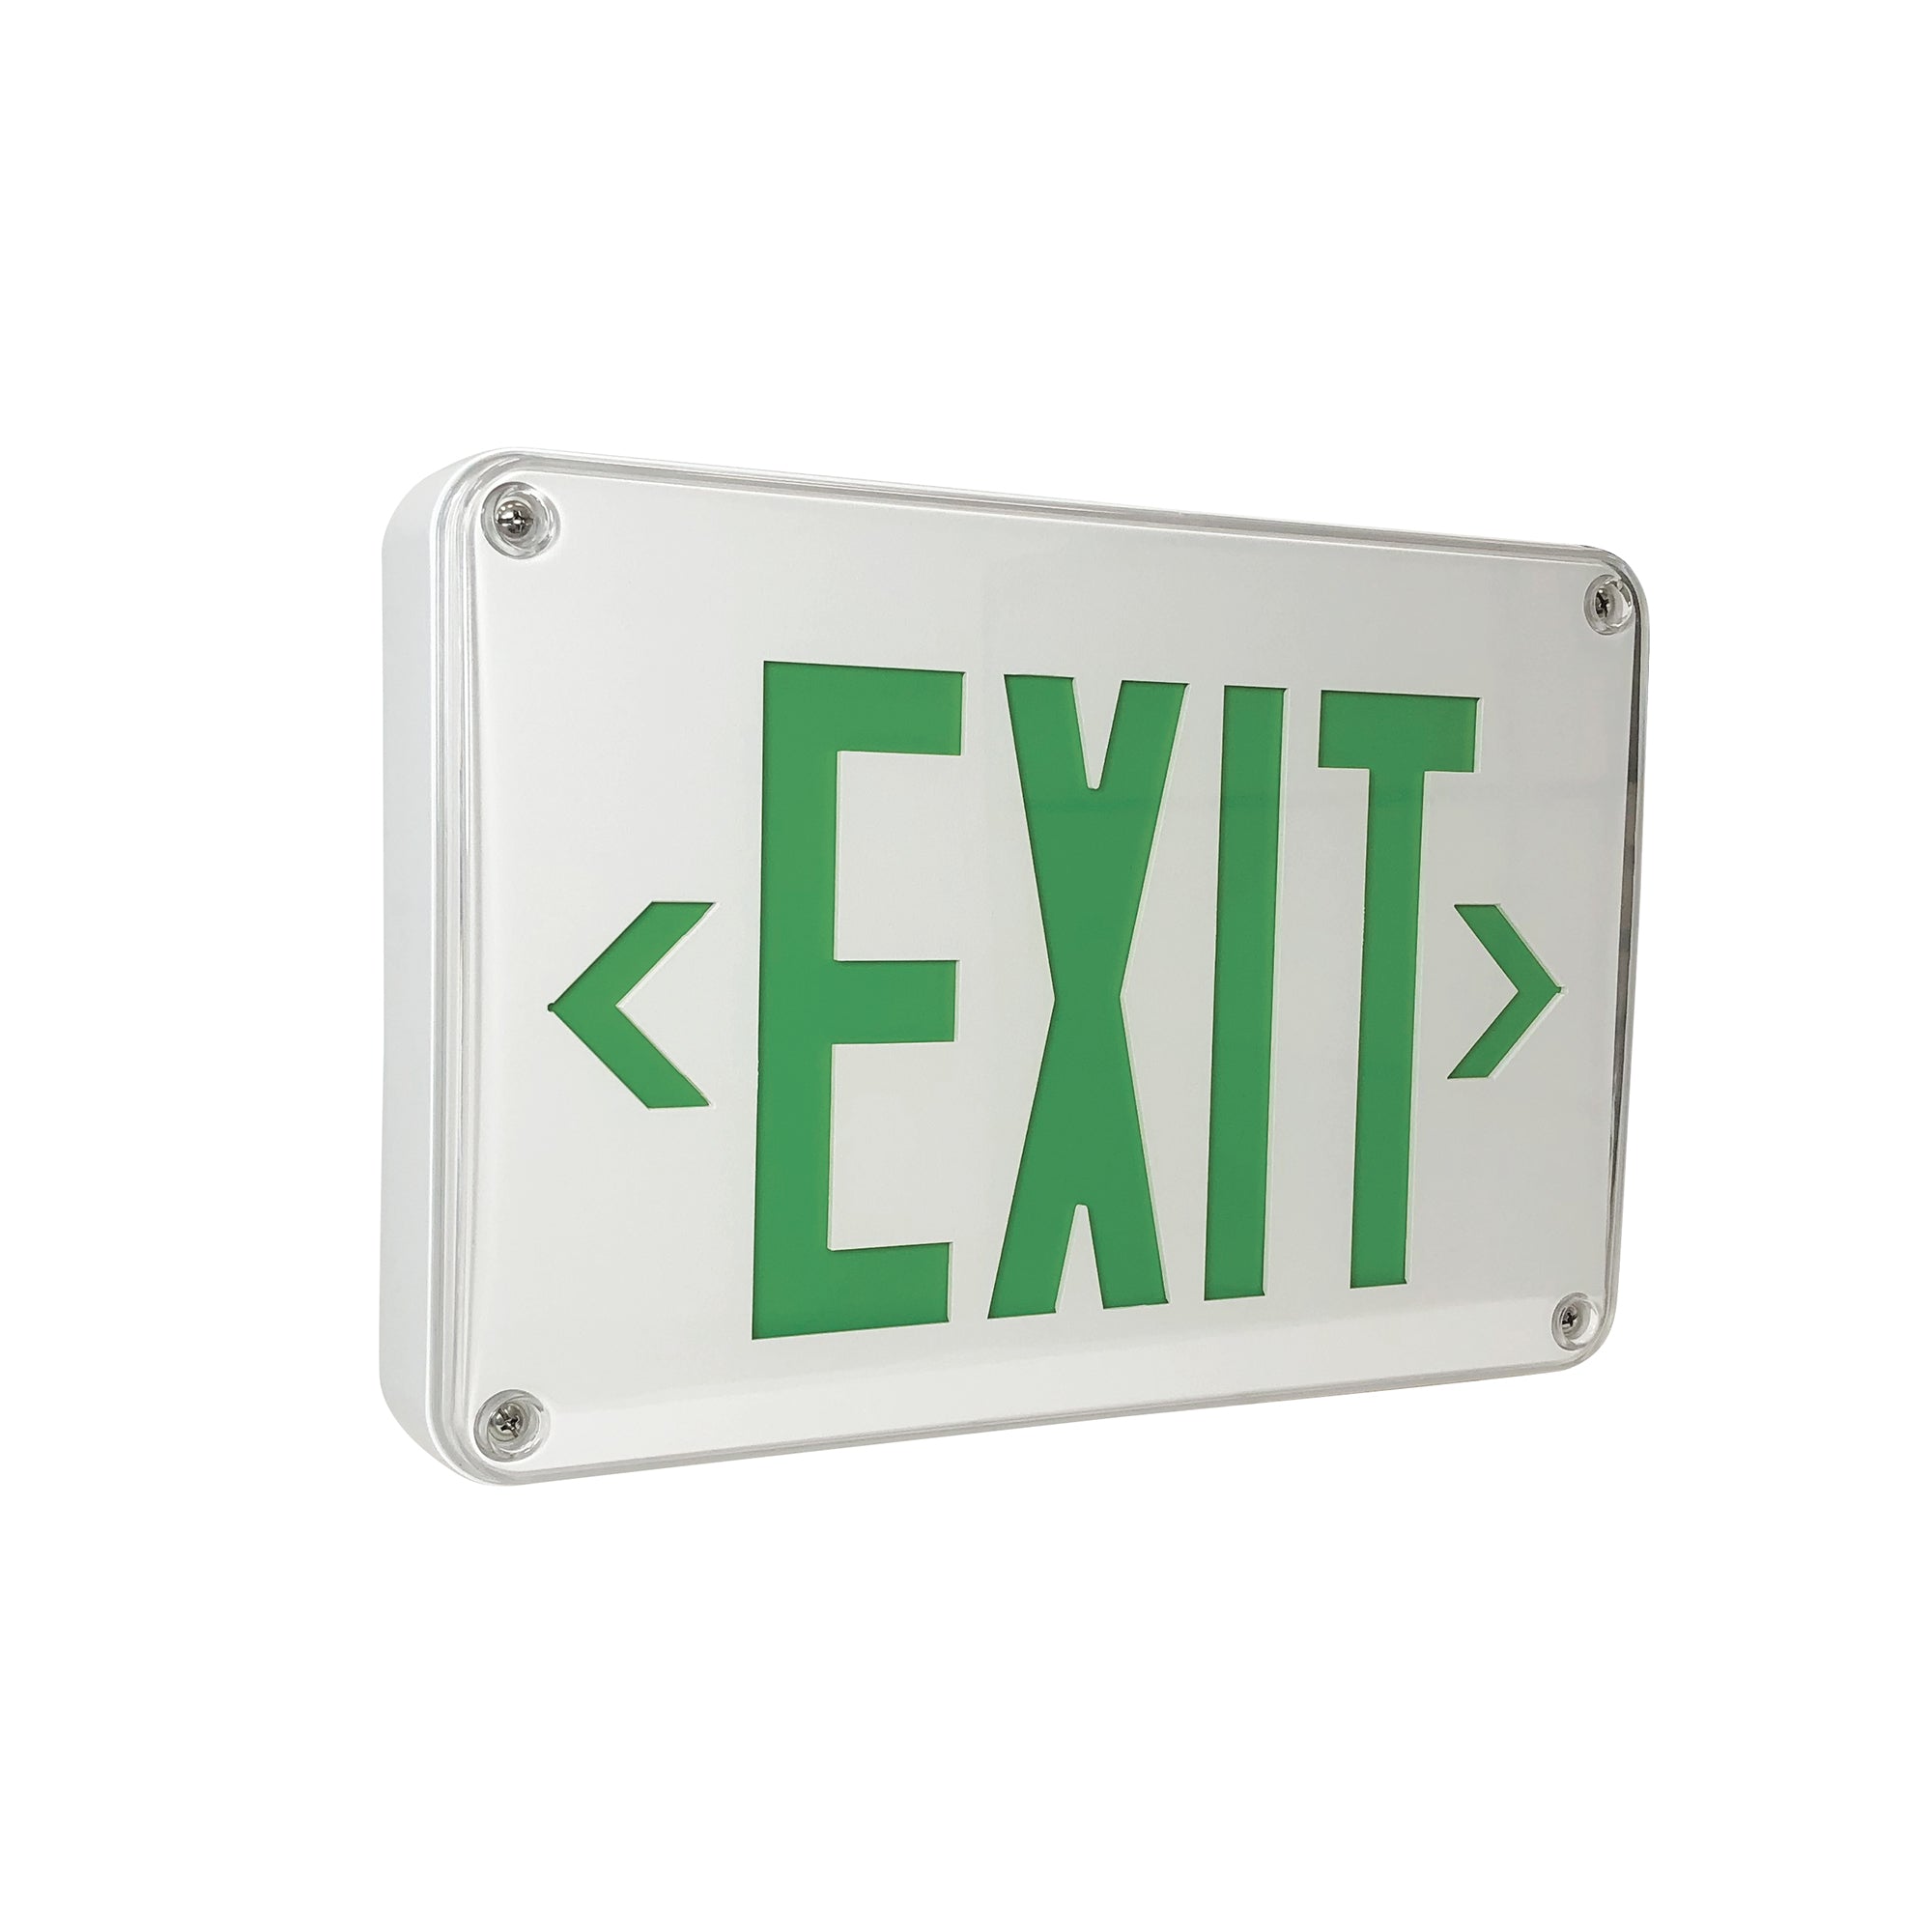 Nora Lighting NX-617-LED/G - Exit / Emergency - LED Self-Diagnostic Wet Location Exit Sign w/ Battery Backup, White Housing w/ 6 Inch Green Letters